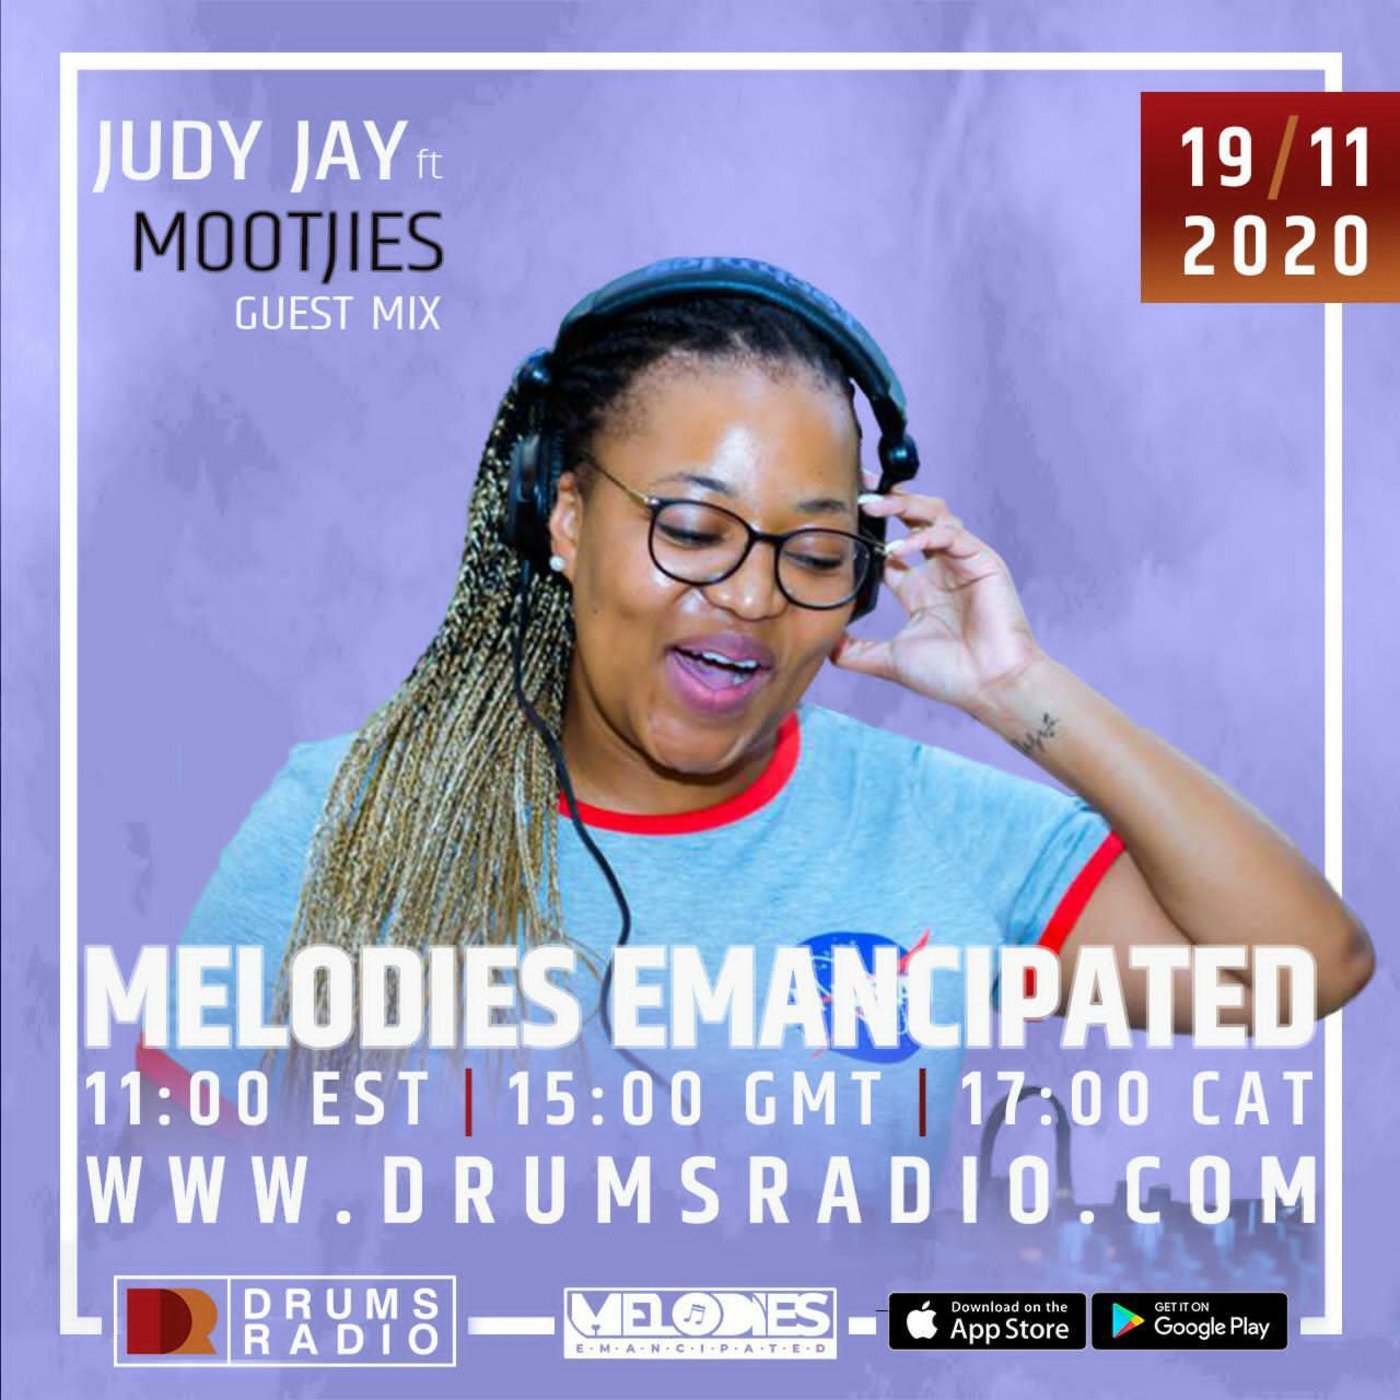 Melodies Emancipated On Drums Radio-  Mixed by Mootjies